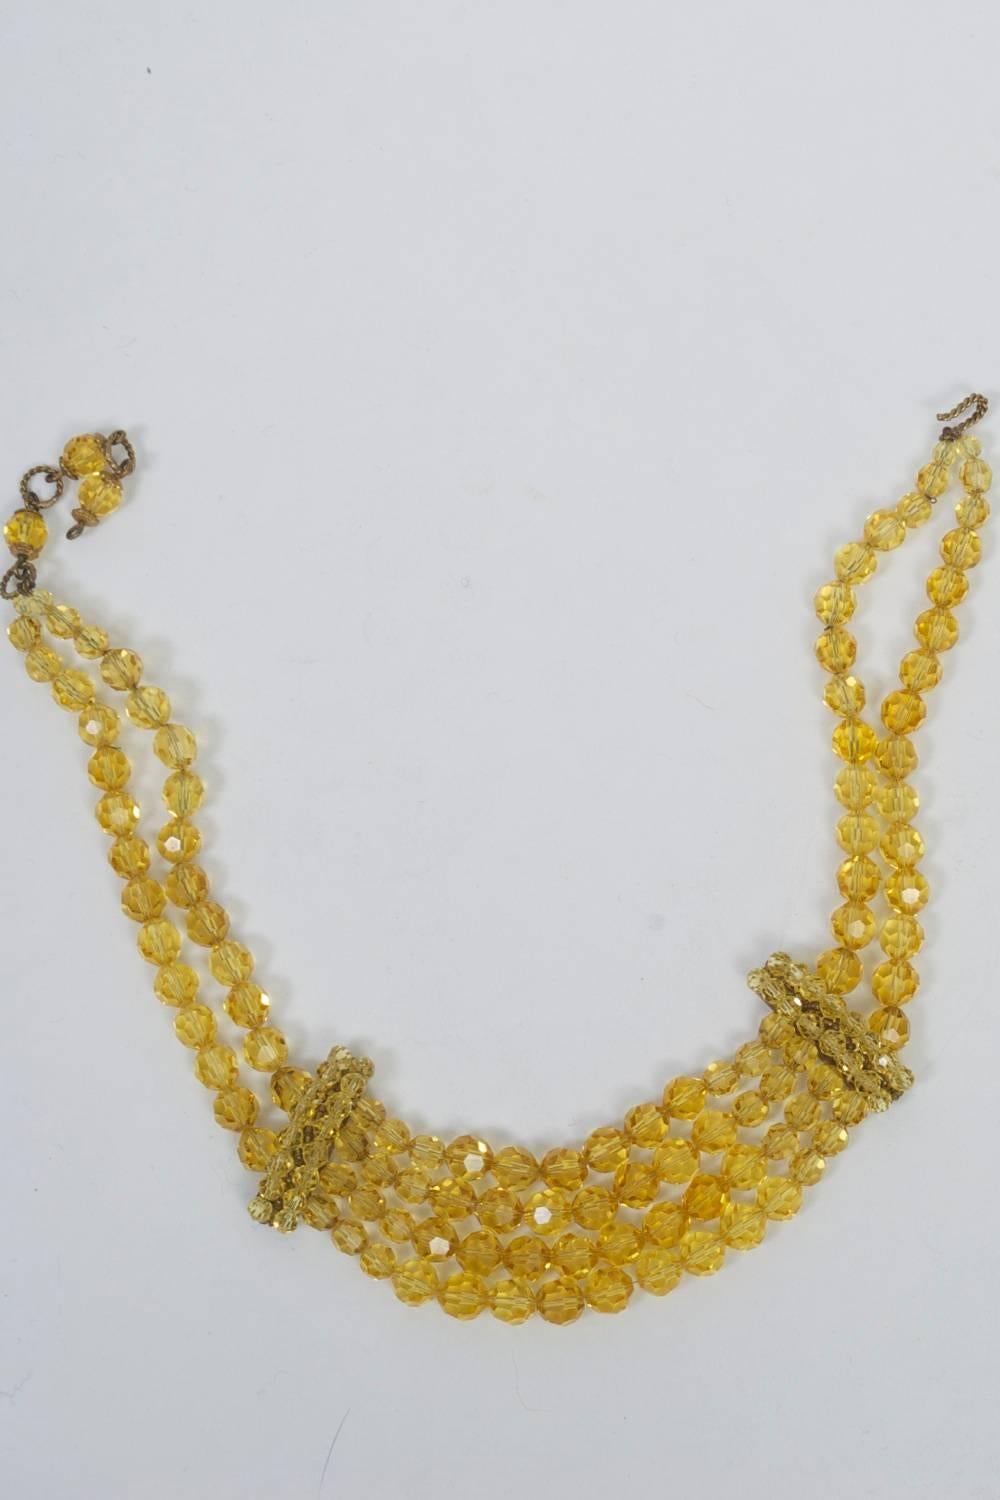 Yellow Crystal Necklace, Coppola e Toppo? In Excellent Condition For Sale In Alford, MA